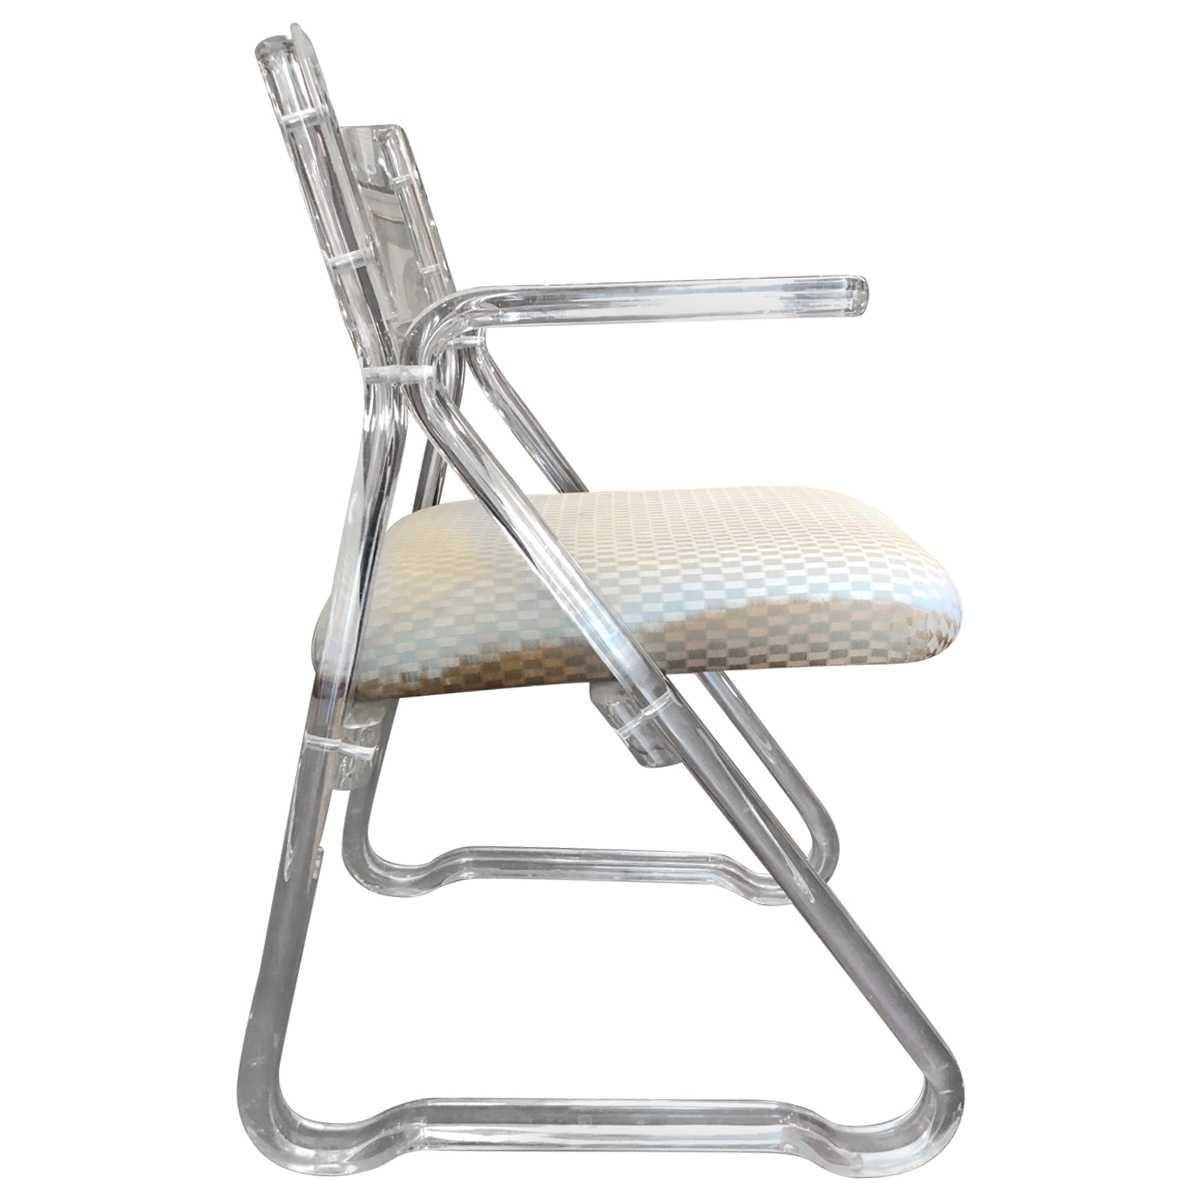 Contoured back.
Gray and tan check seat upholstery.

Acrylic, cotton blend
Dimensions:
Width 20